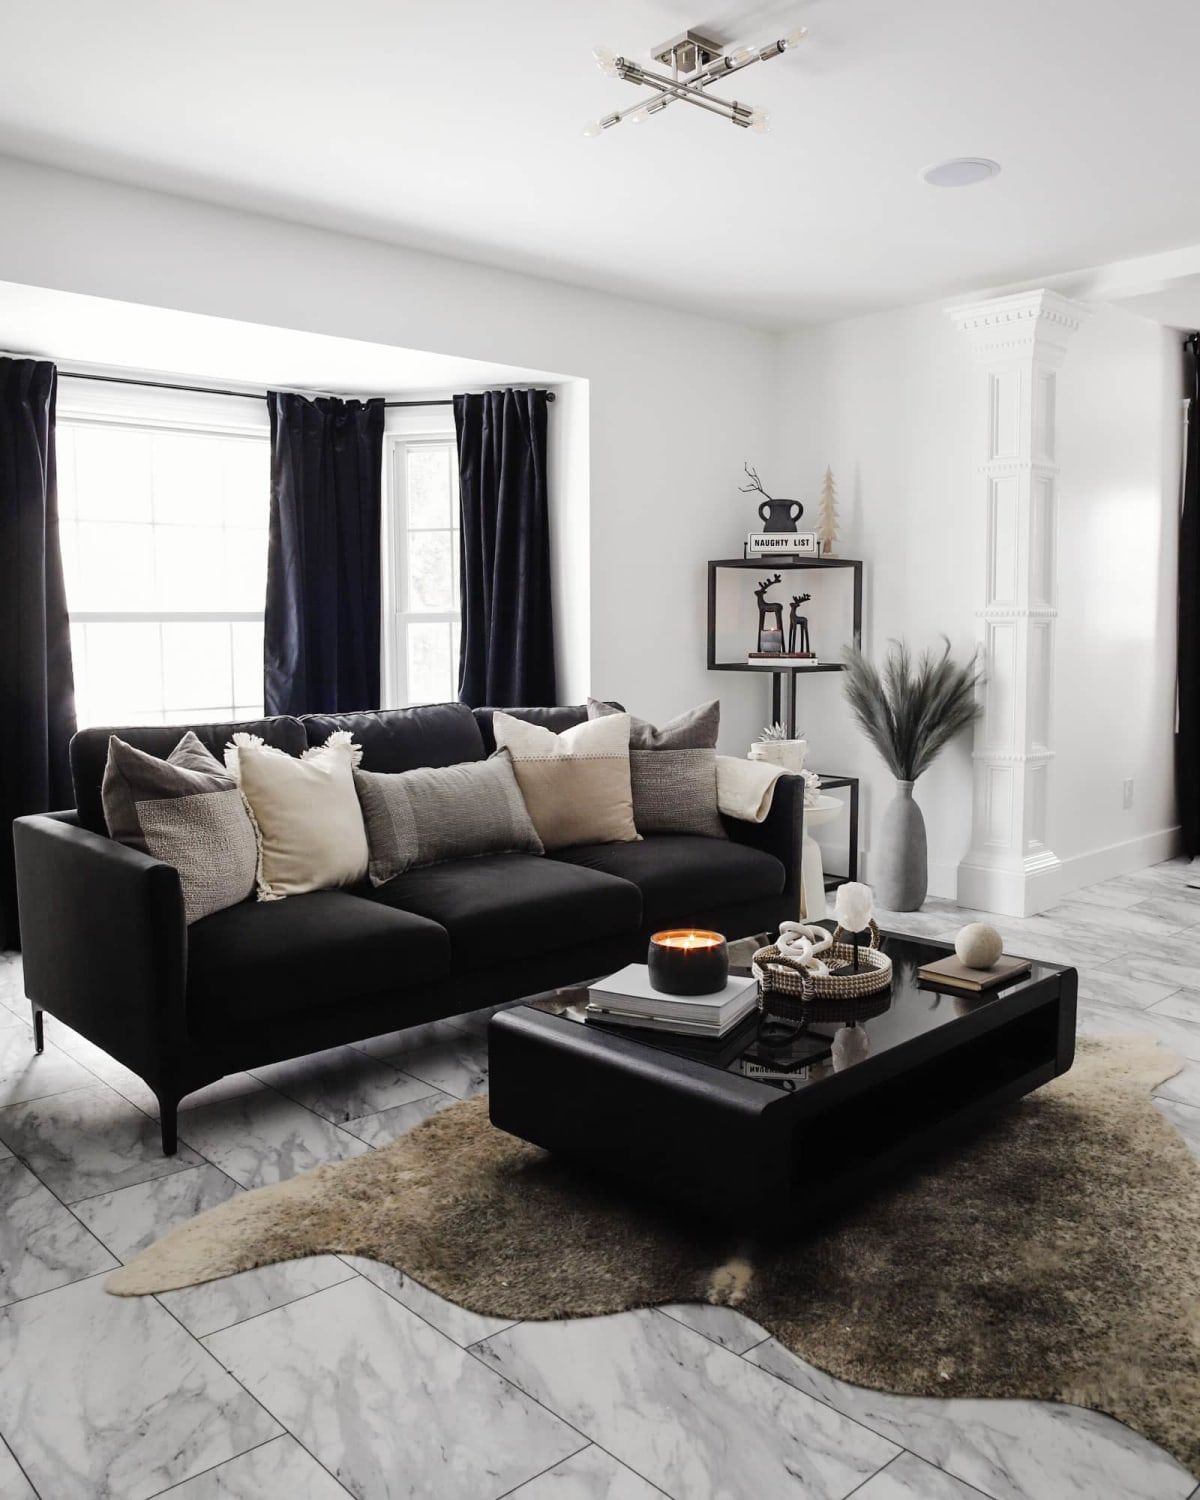 How To Style A Black Sofa | Castlery Us Pertaining To Traditional Black Fabric Sofas (View 12 of 15)